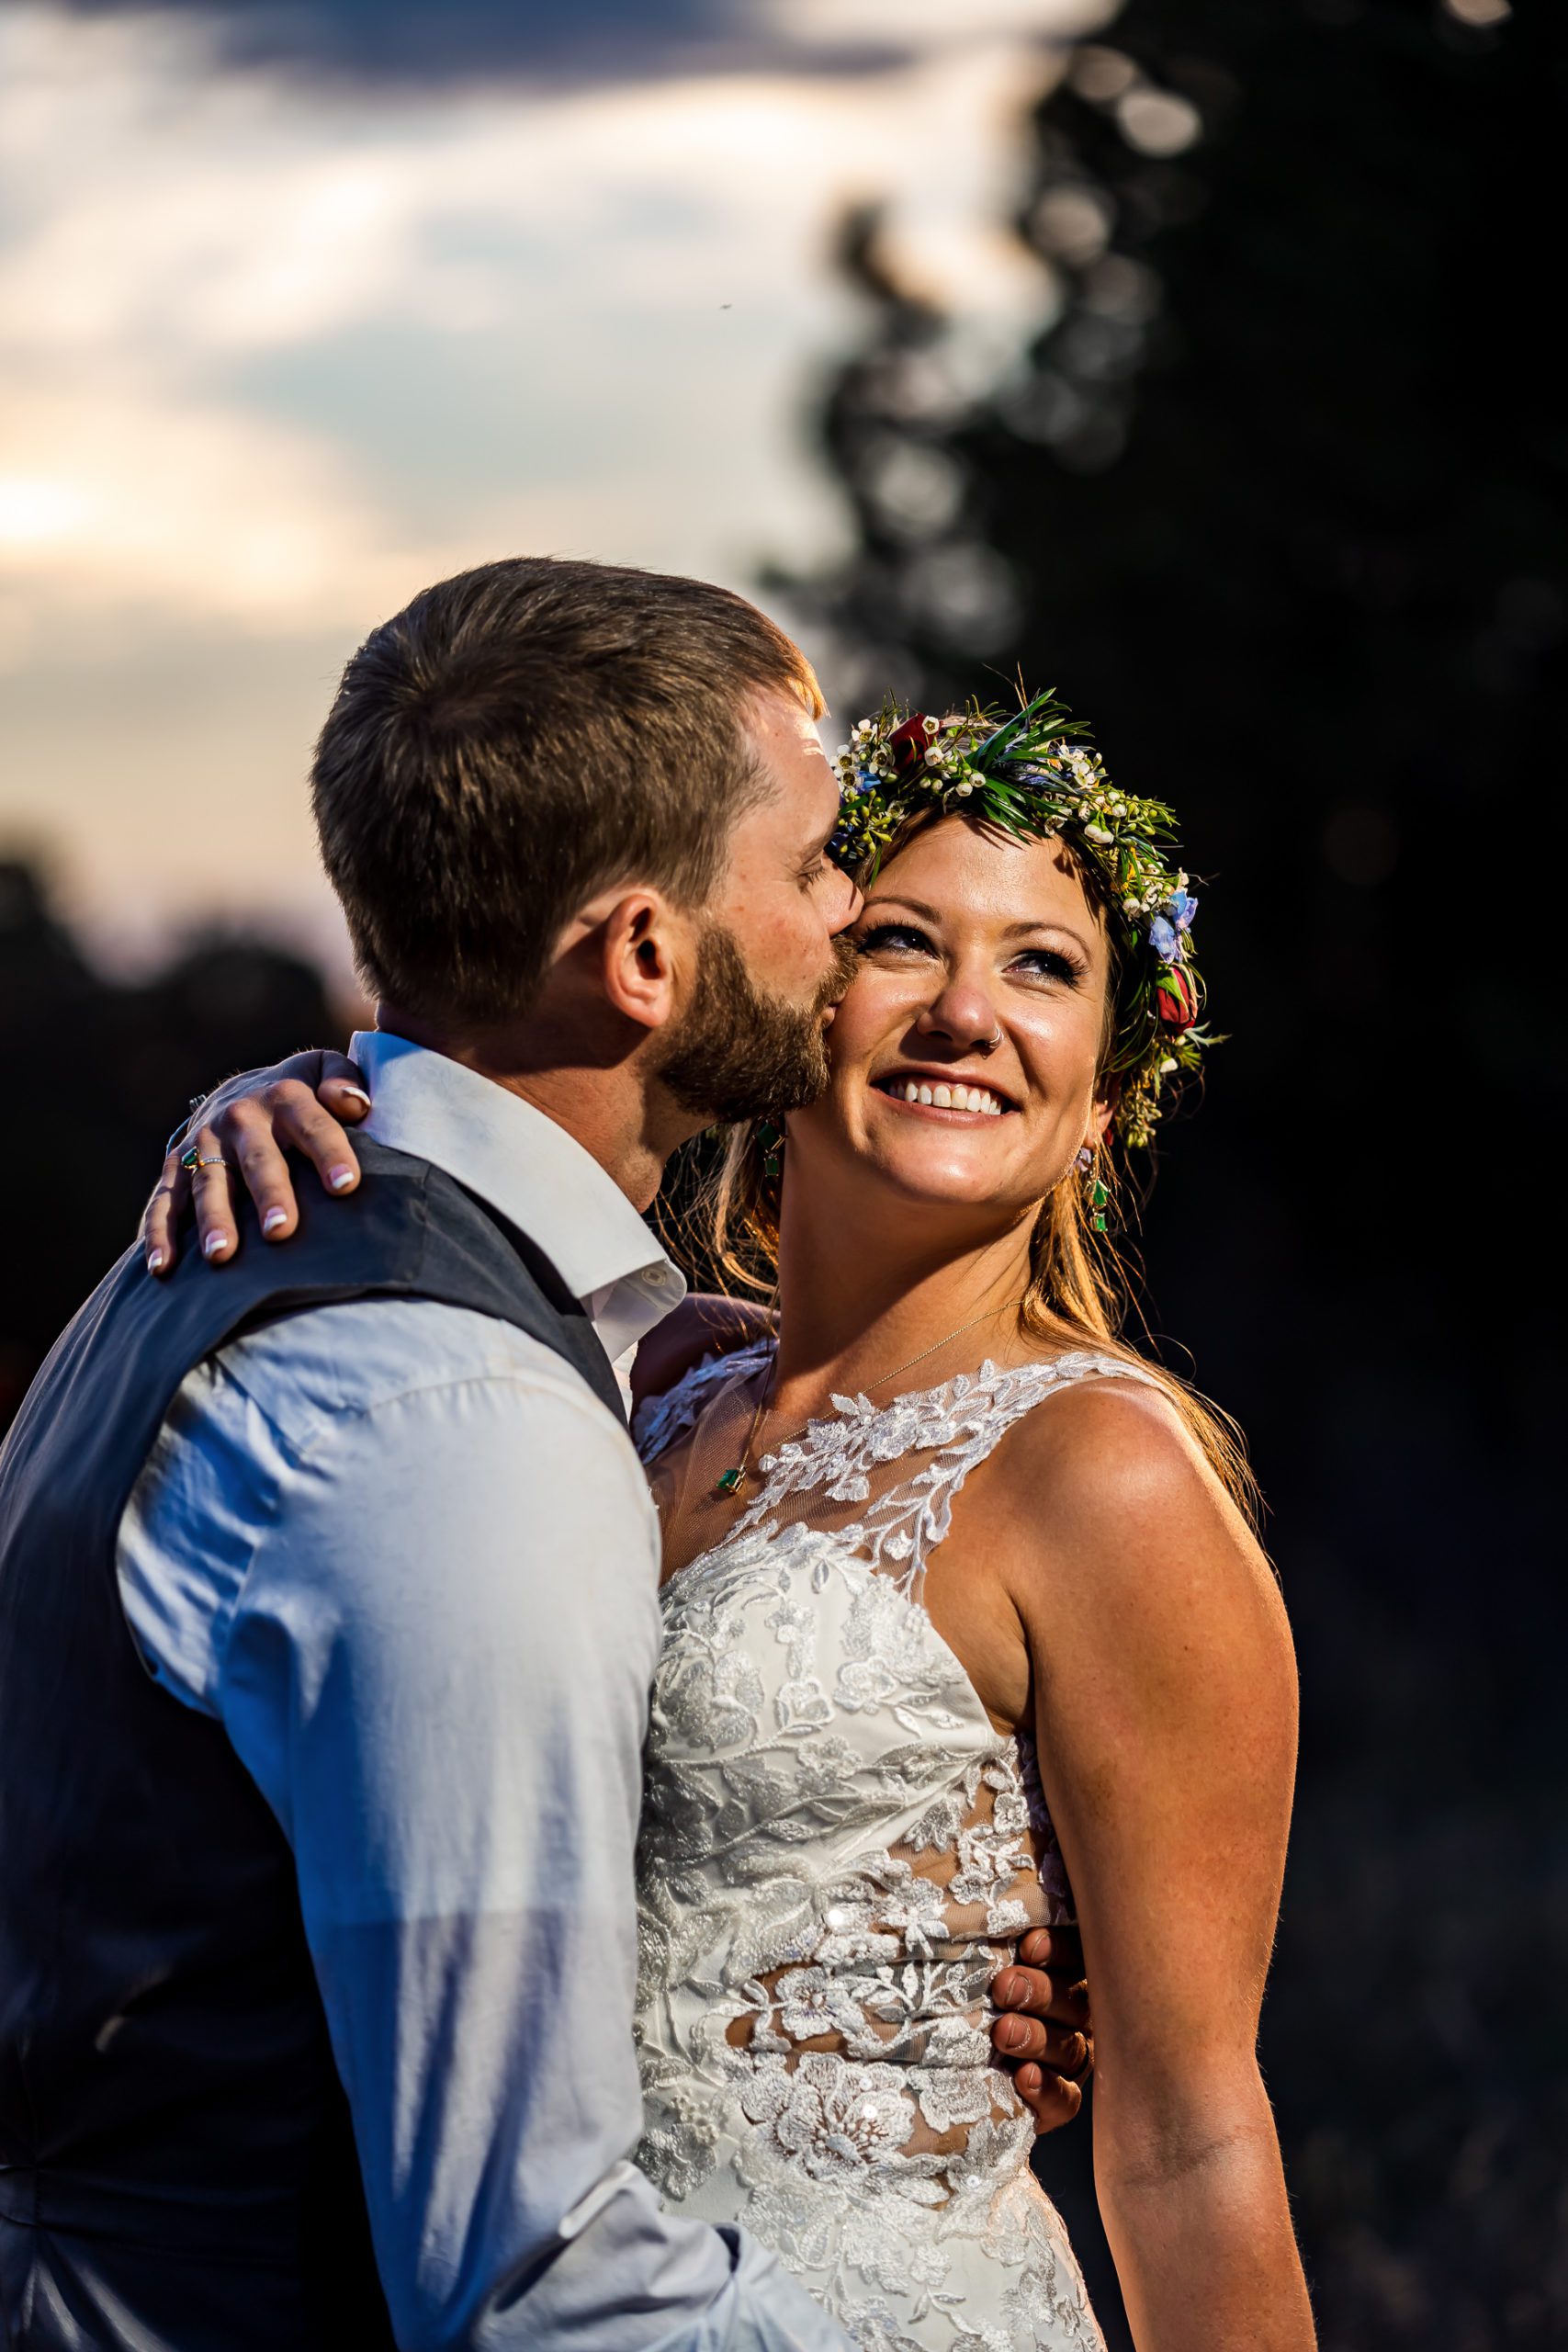 a groom kisses his bride wearing a flower crown on their wedding day